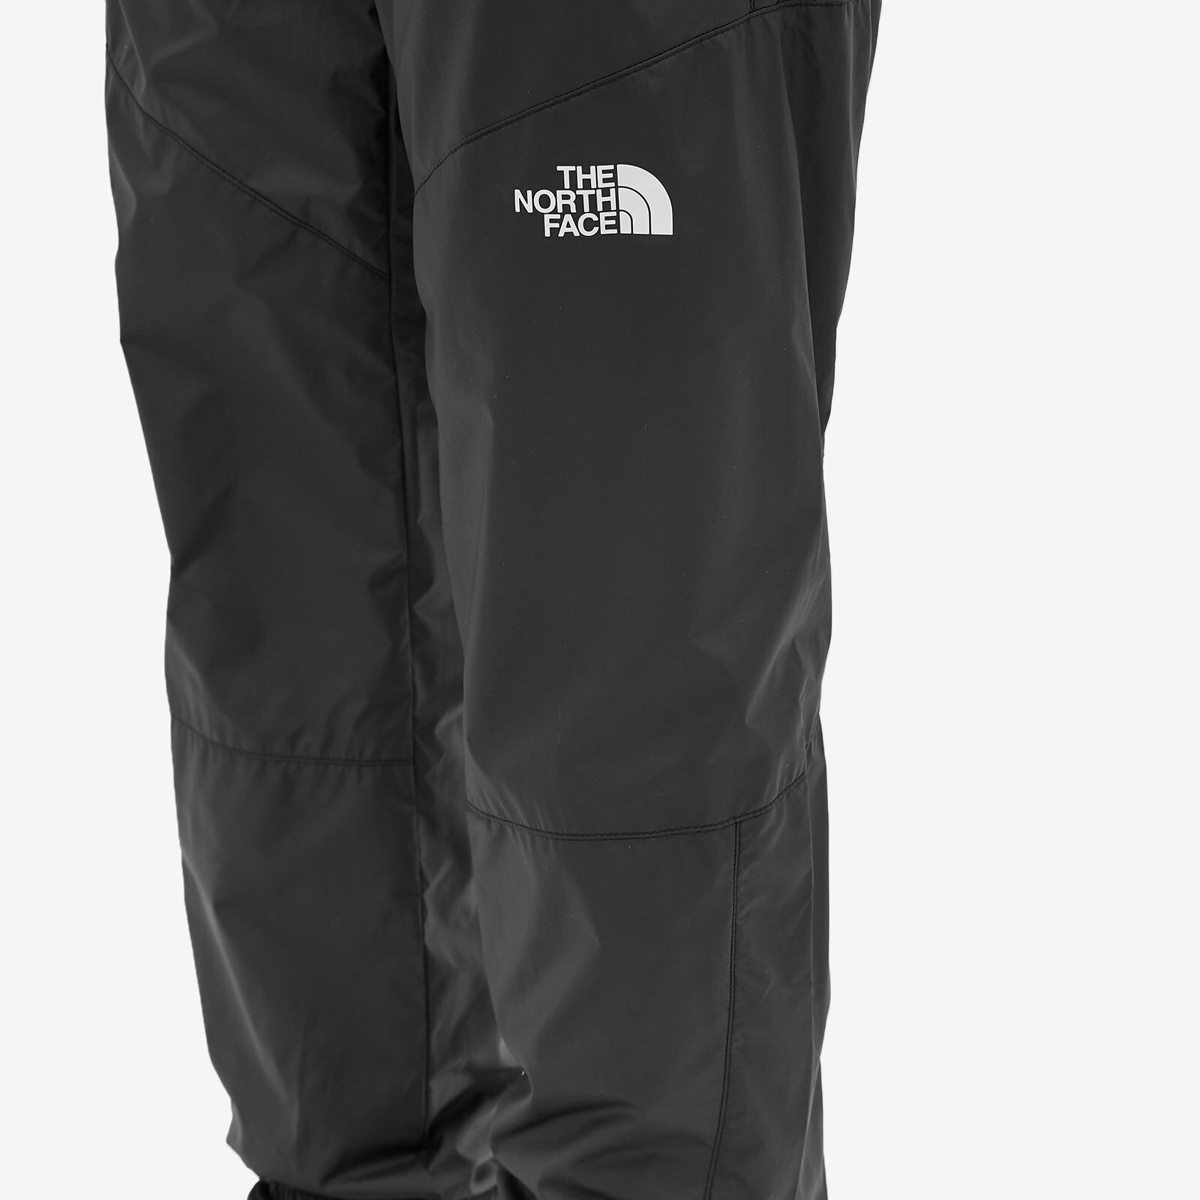 The North Face Men's Hydrenaline 2000 Pant in Tnf Black The North Face